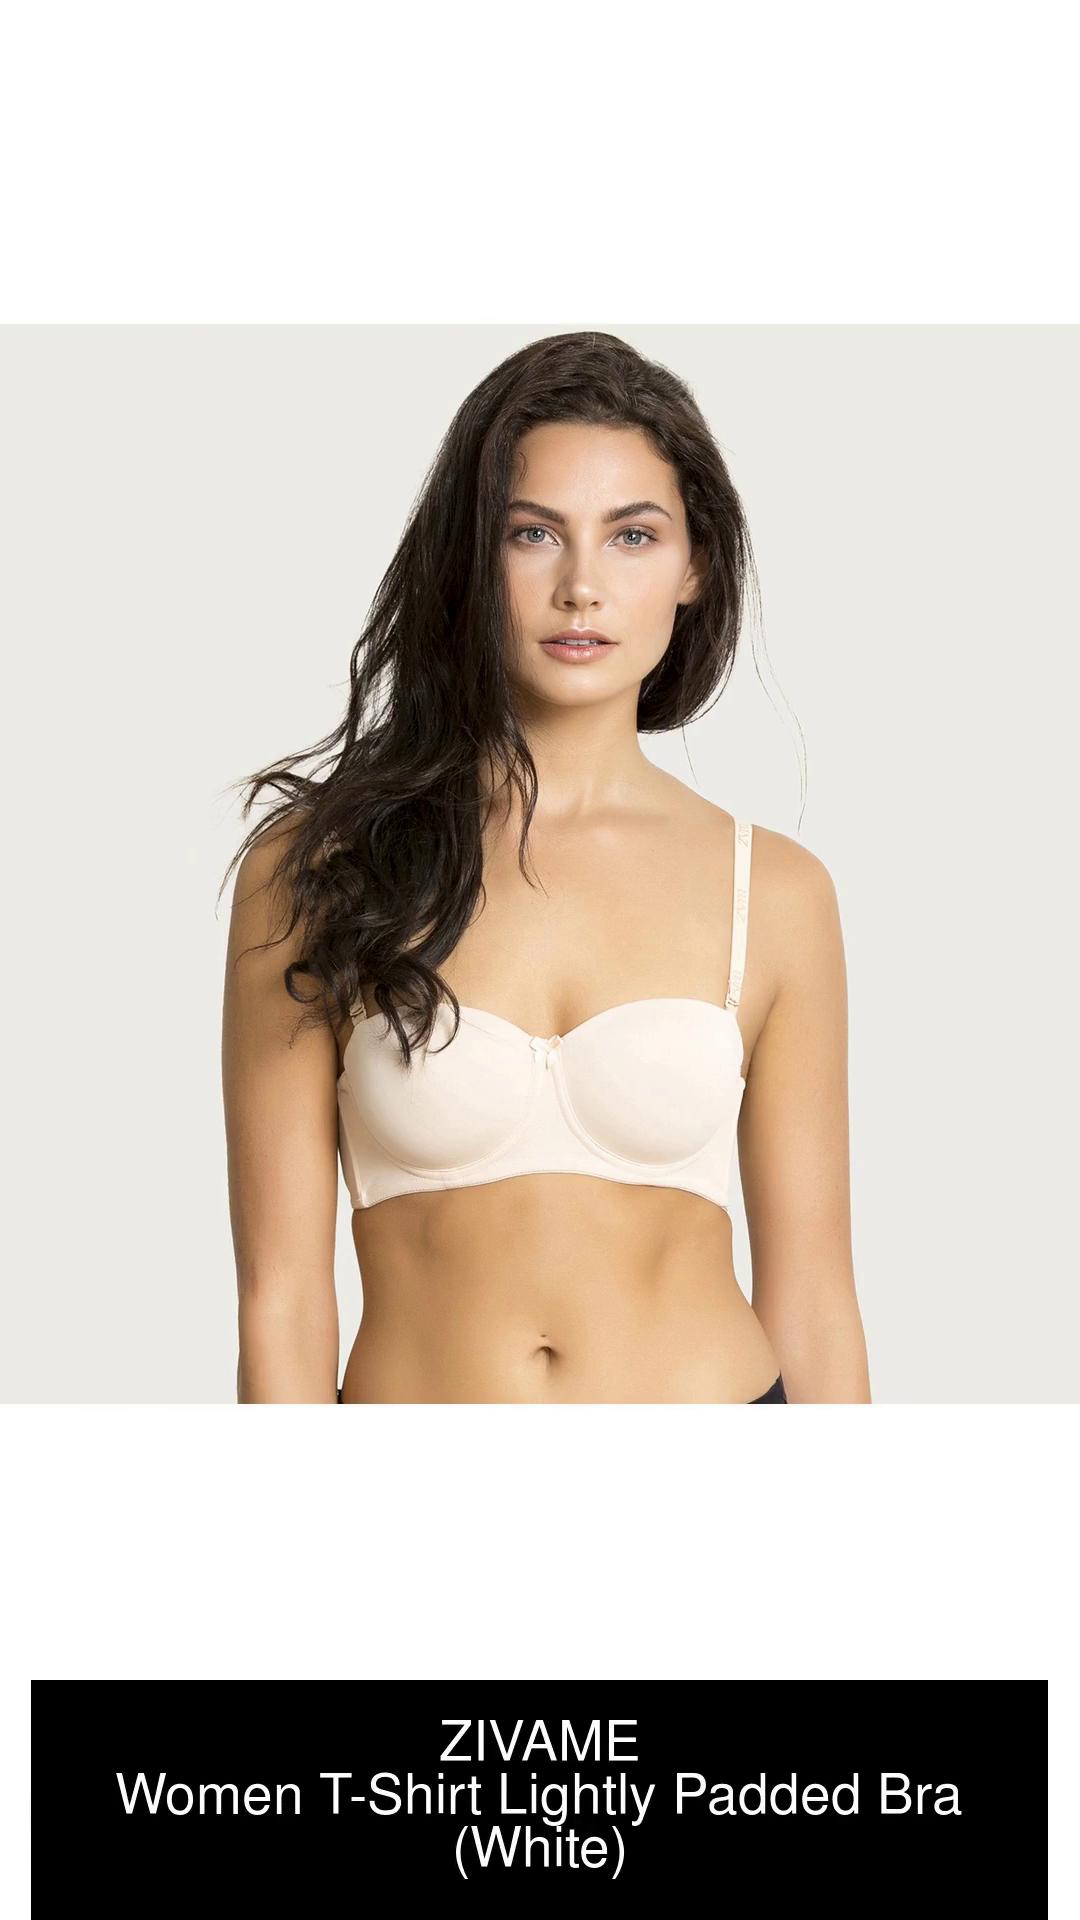 Zivame - The Zivame Shaper Bra is an innovation that is